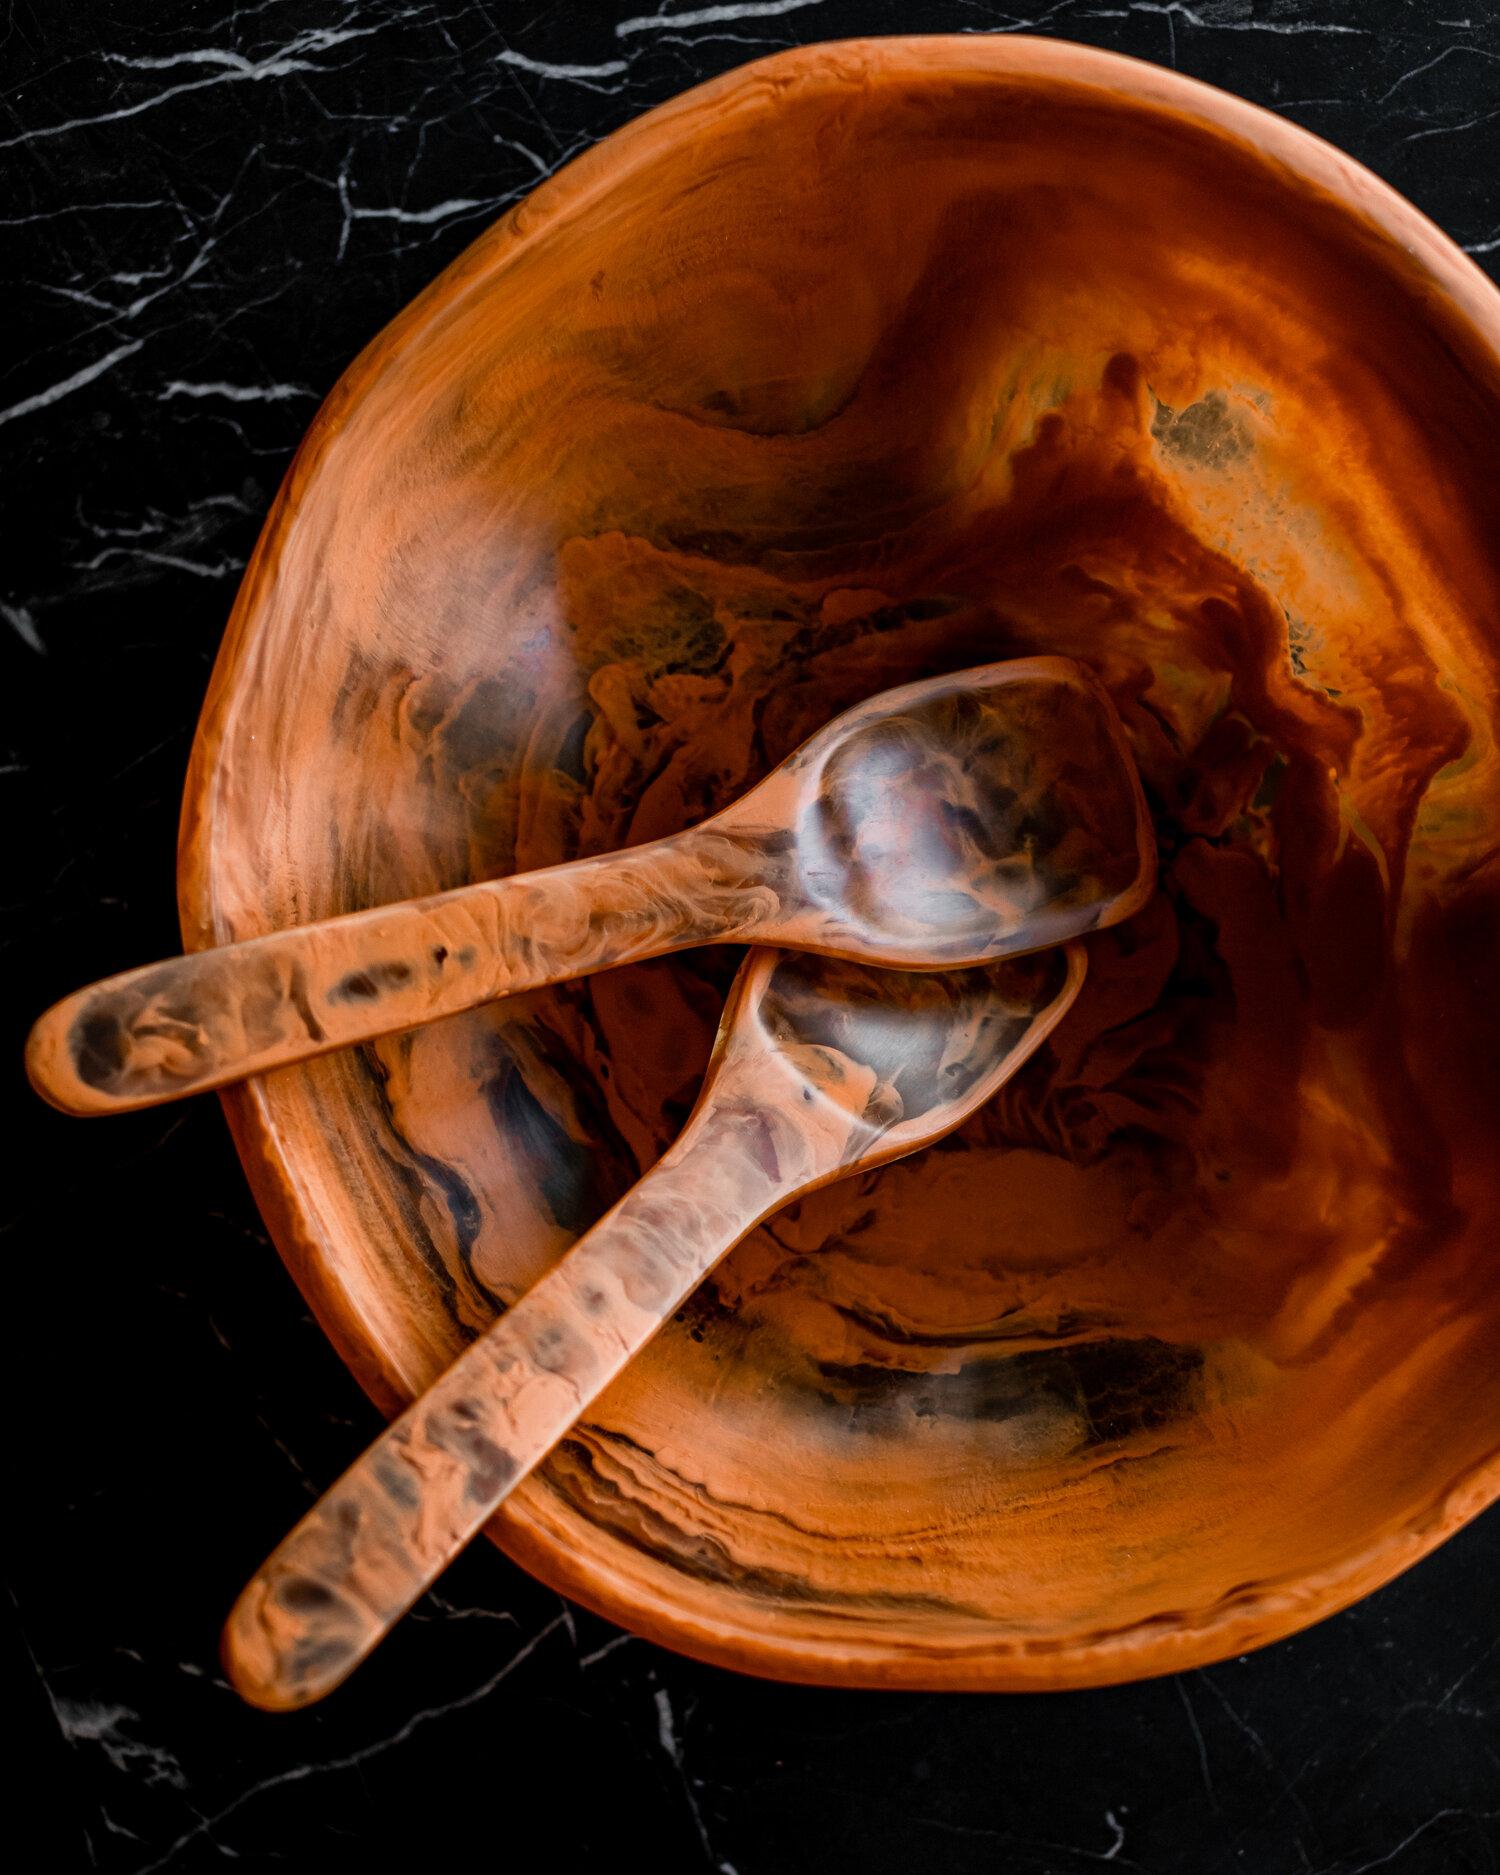 This rust colored resin bowl's shape evokes that of natural stone. and is a beautiful example of the artisanal craftsmanship that goes into each piece designed by Monica Calderon and handmade by expert artisans in Mexico. The stone resin bowl in